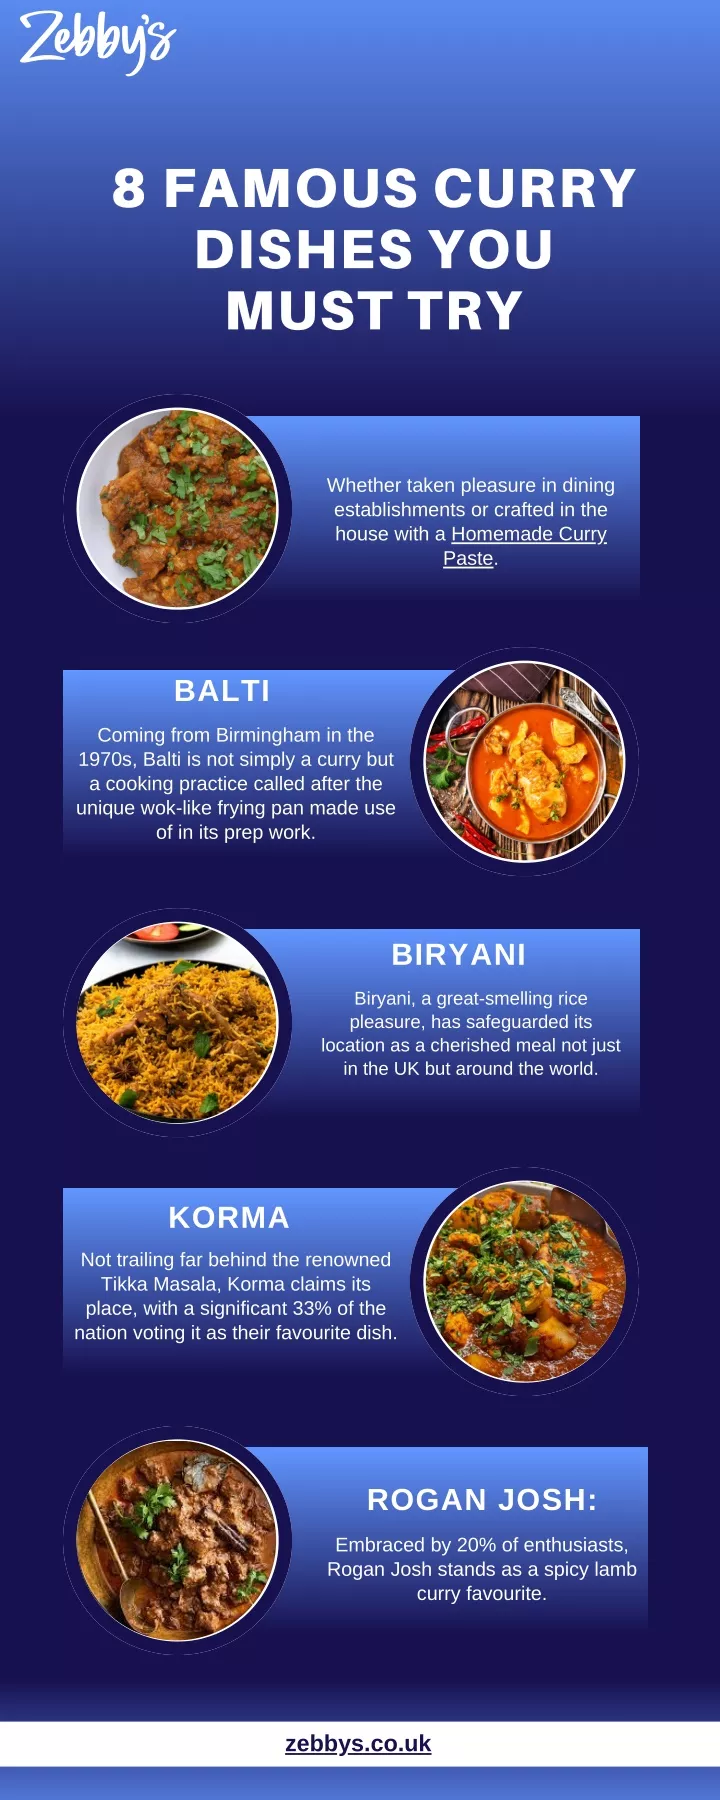 8 famous curry dishes you must try